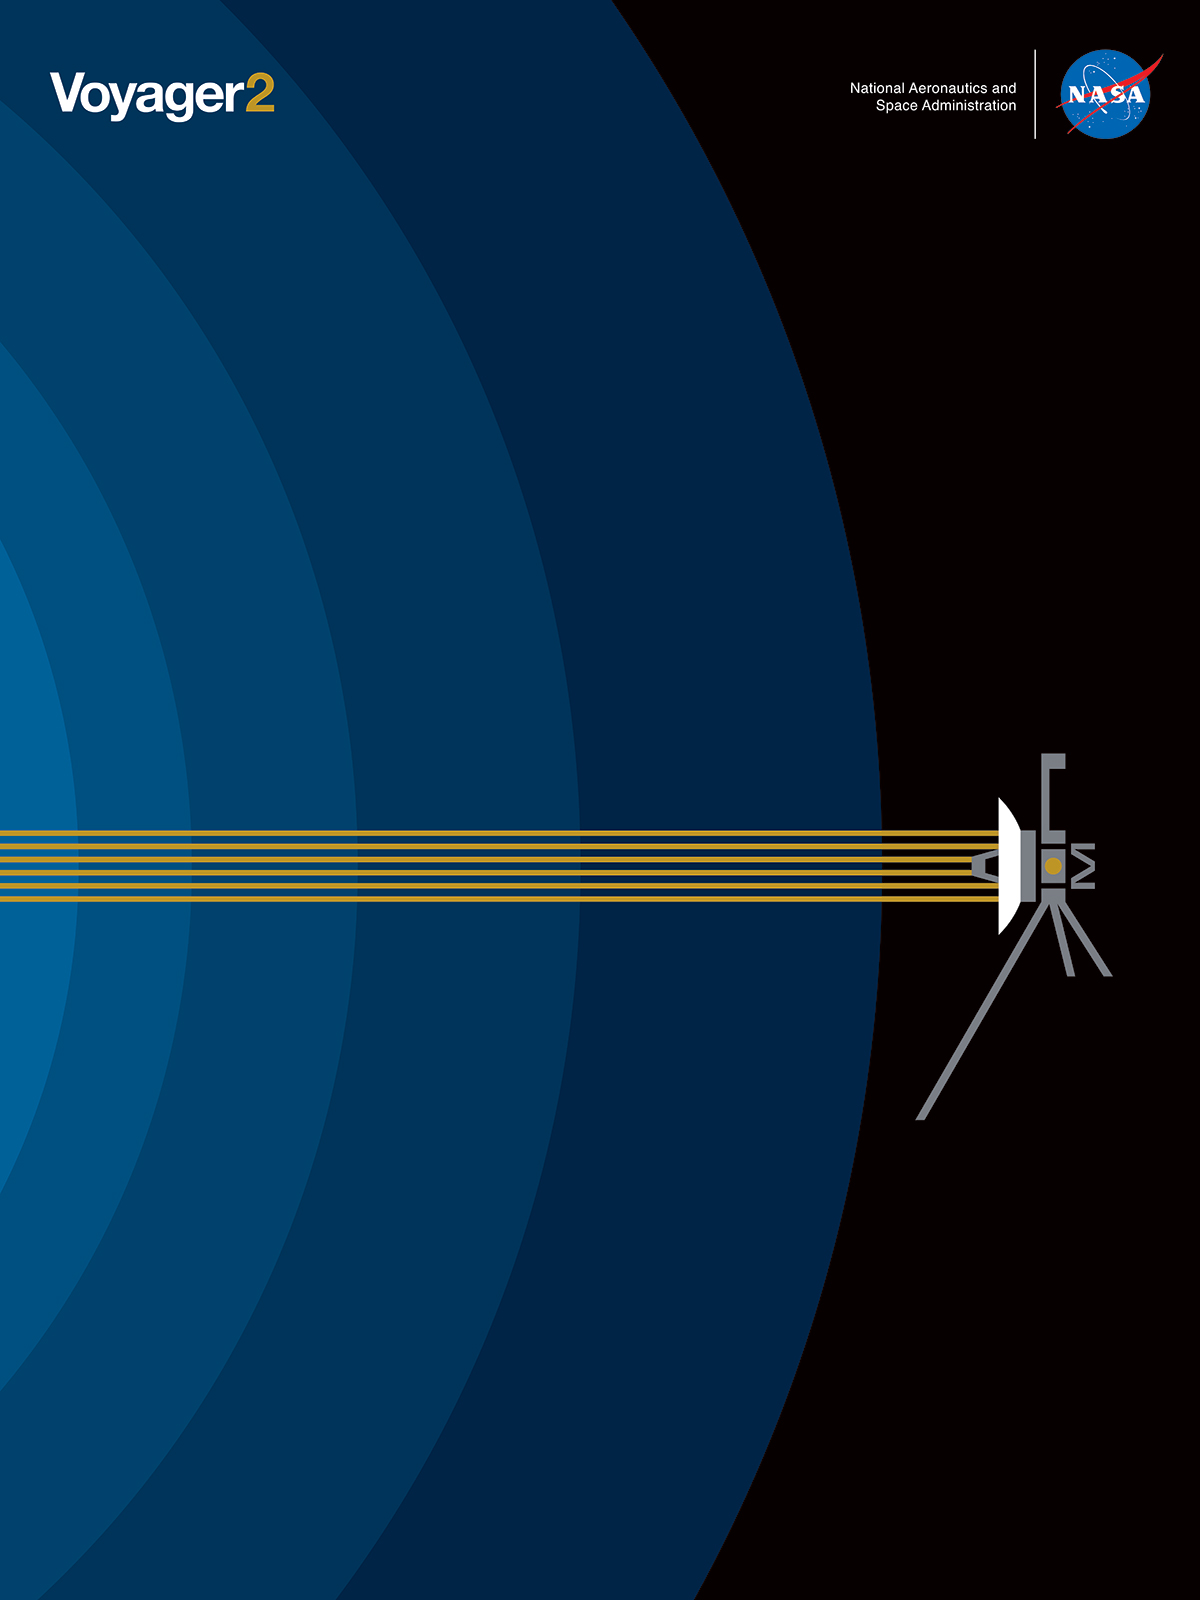 This artistic graphic illustrates Voyager 2's journey into interstellar space.